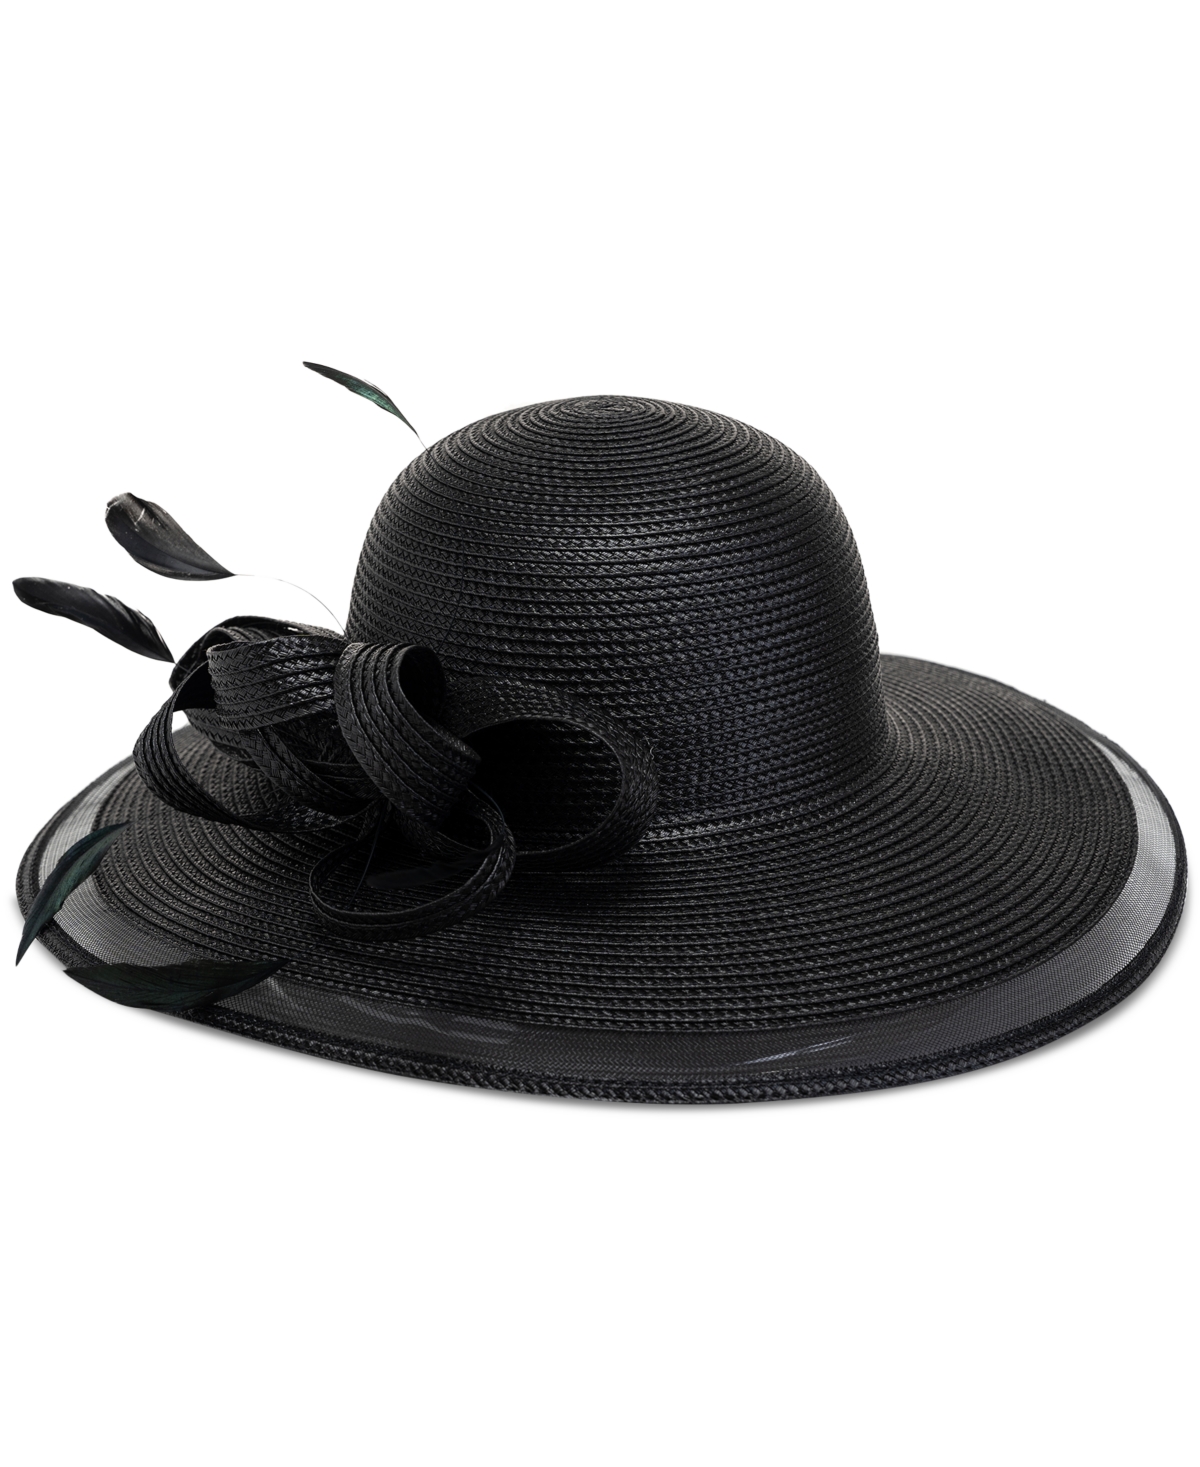 Bellissima Millinery Collection Women's Sheer Ruffled Brim Dressy Hat In Black